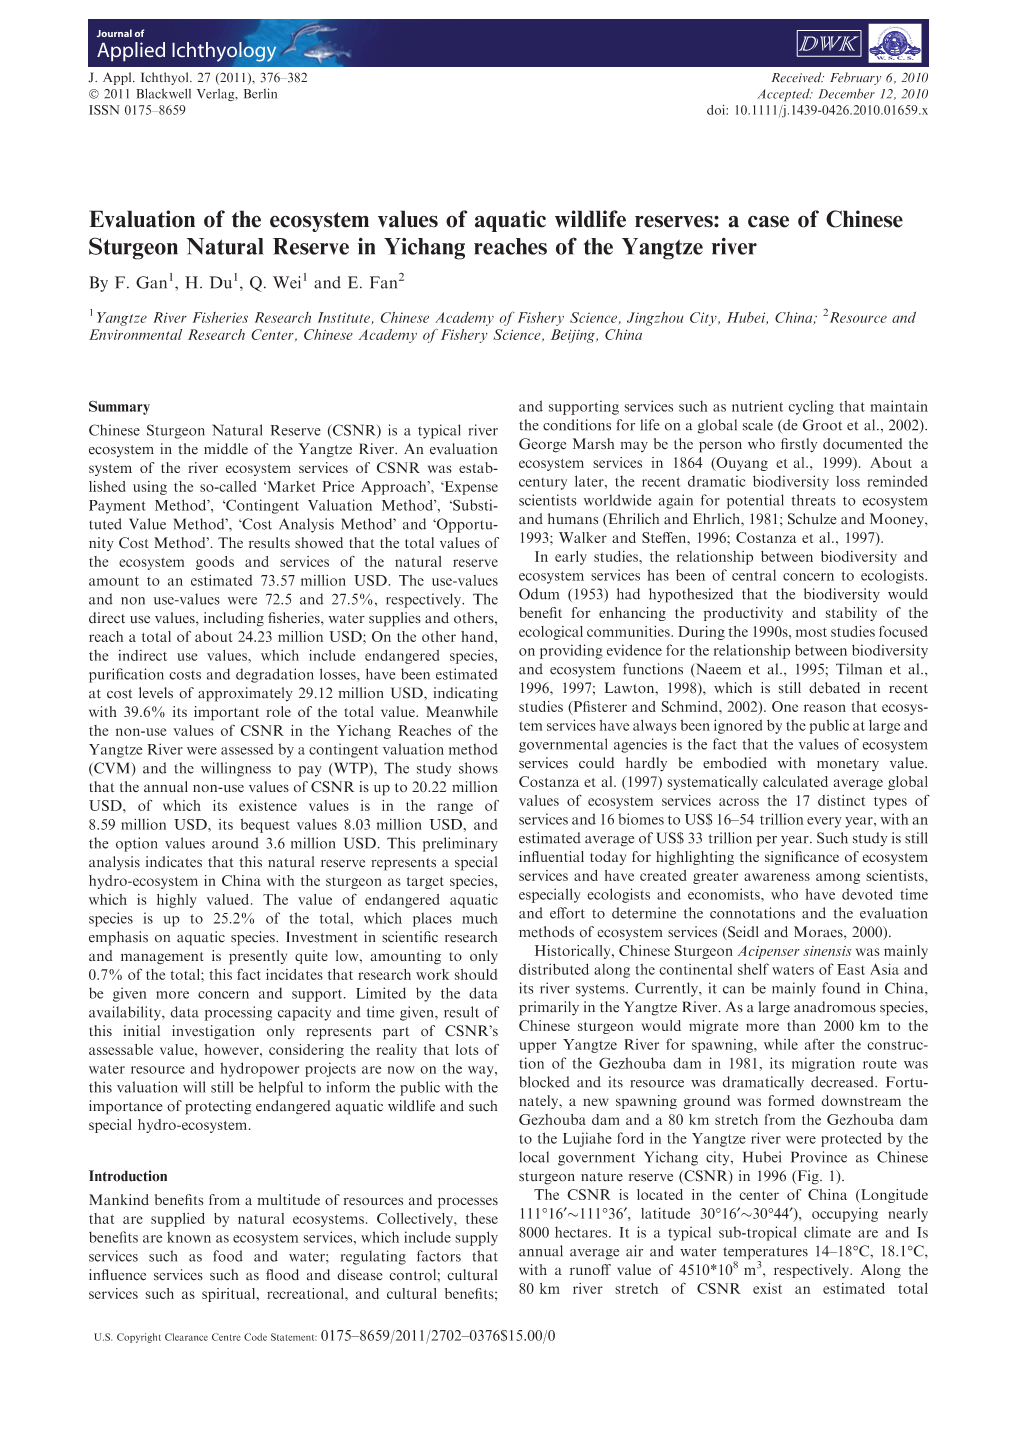 Evaluation of the Ecosystem Values of Aquatic Wildlife Reserves: a Case of Chinese Sturgeon Natural Reserve in Yichang Reaches of the Yangtze River by F